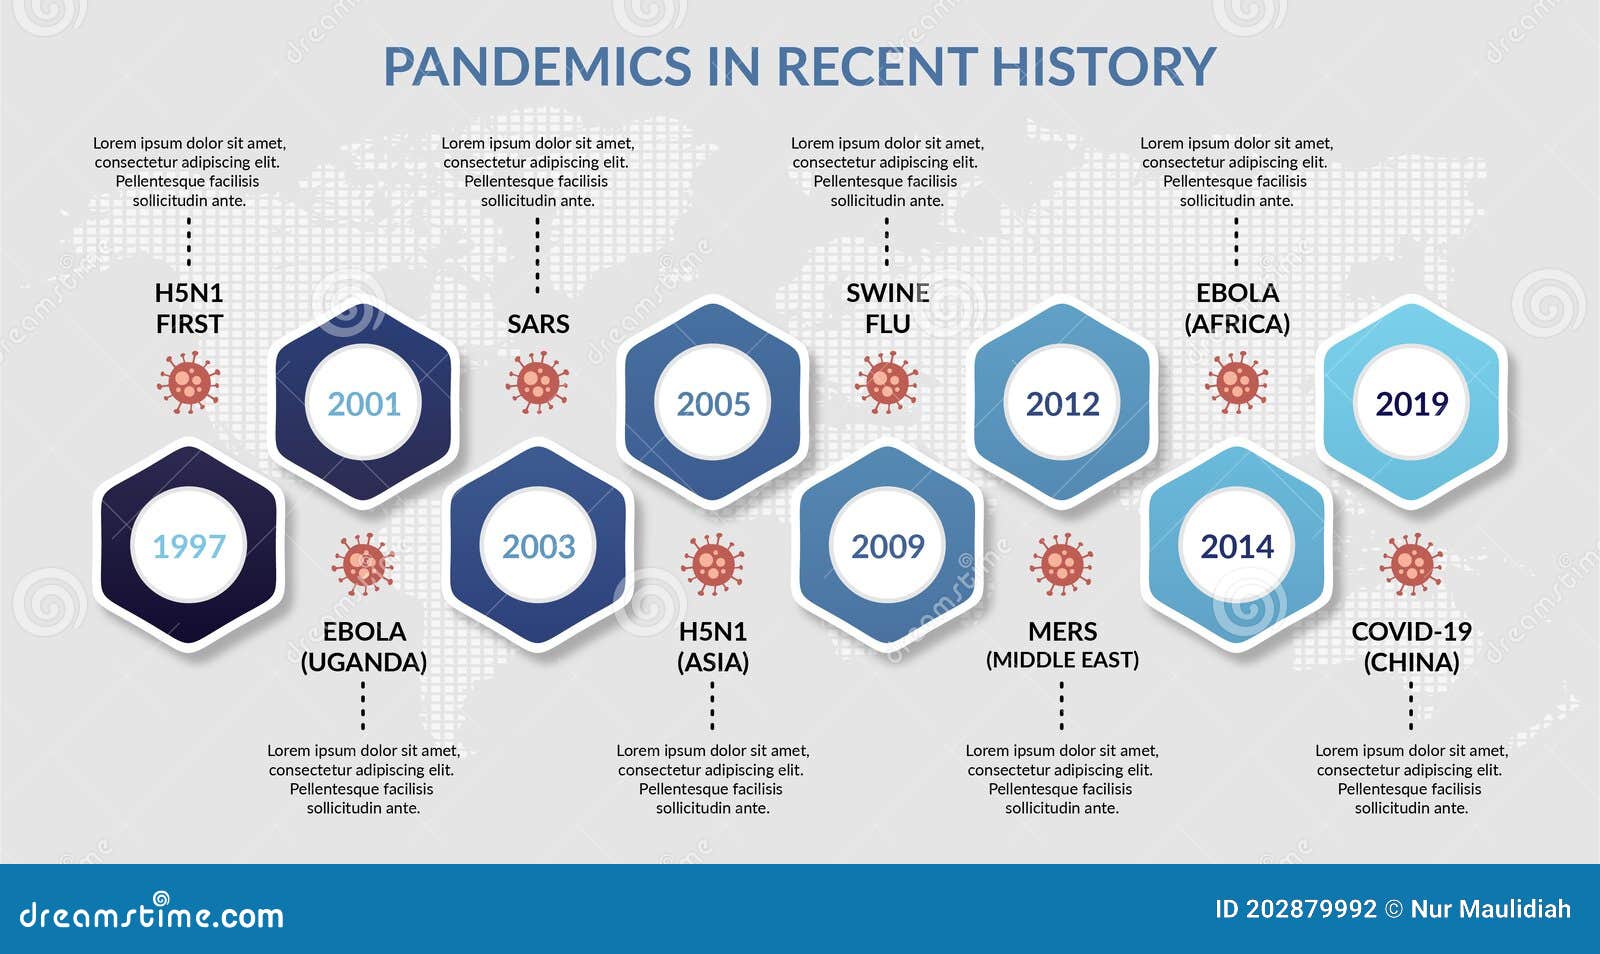 pandemic in recent history, data visualization